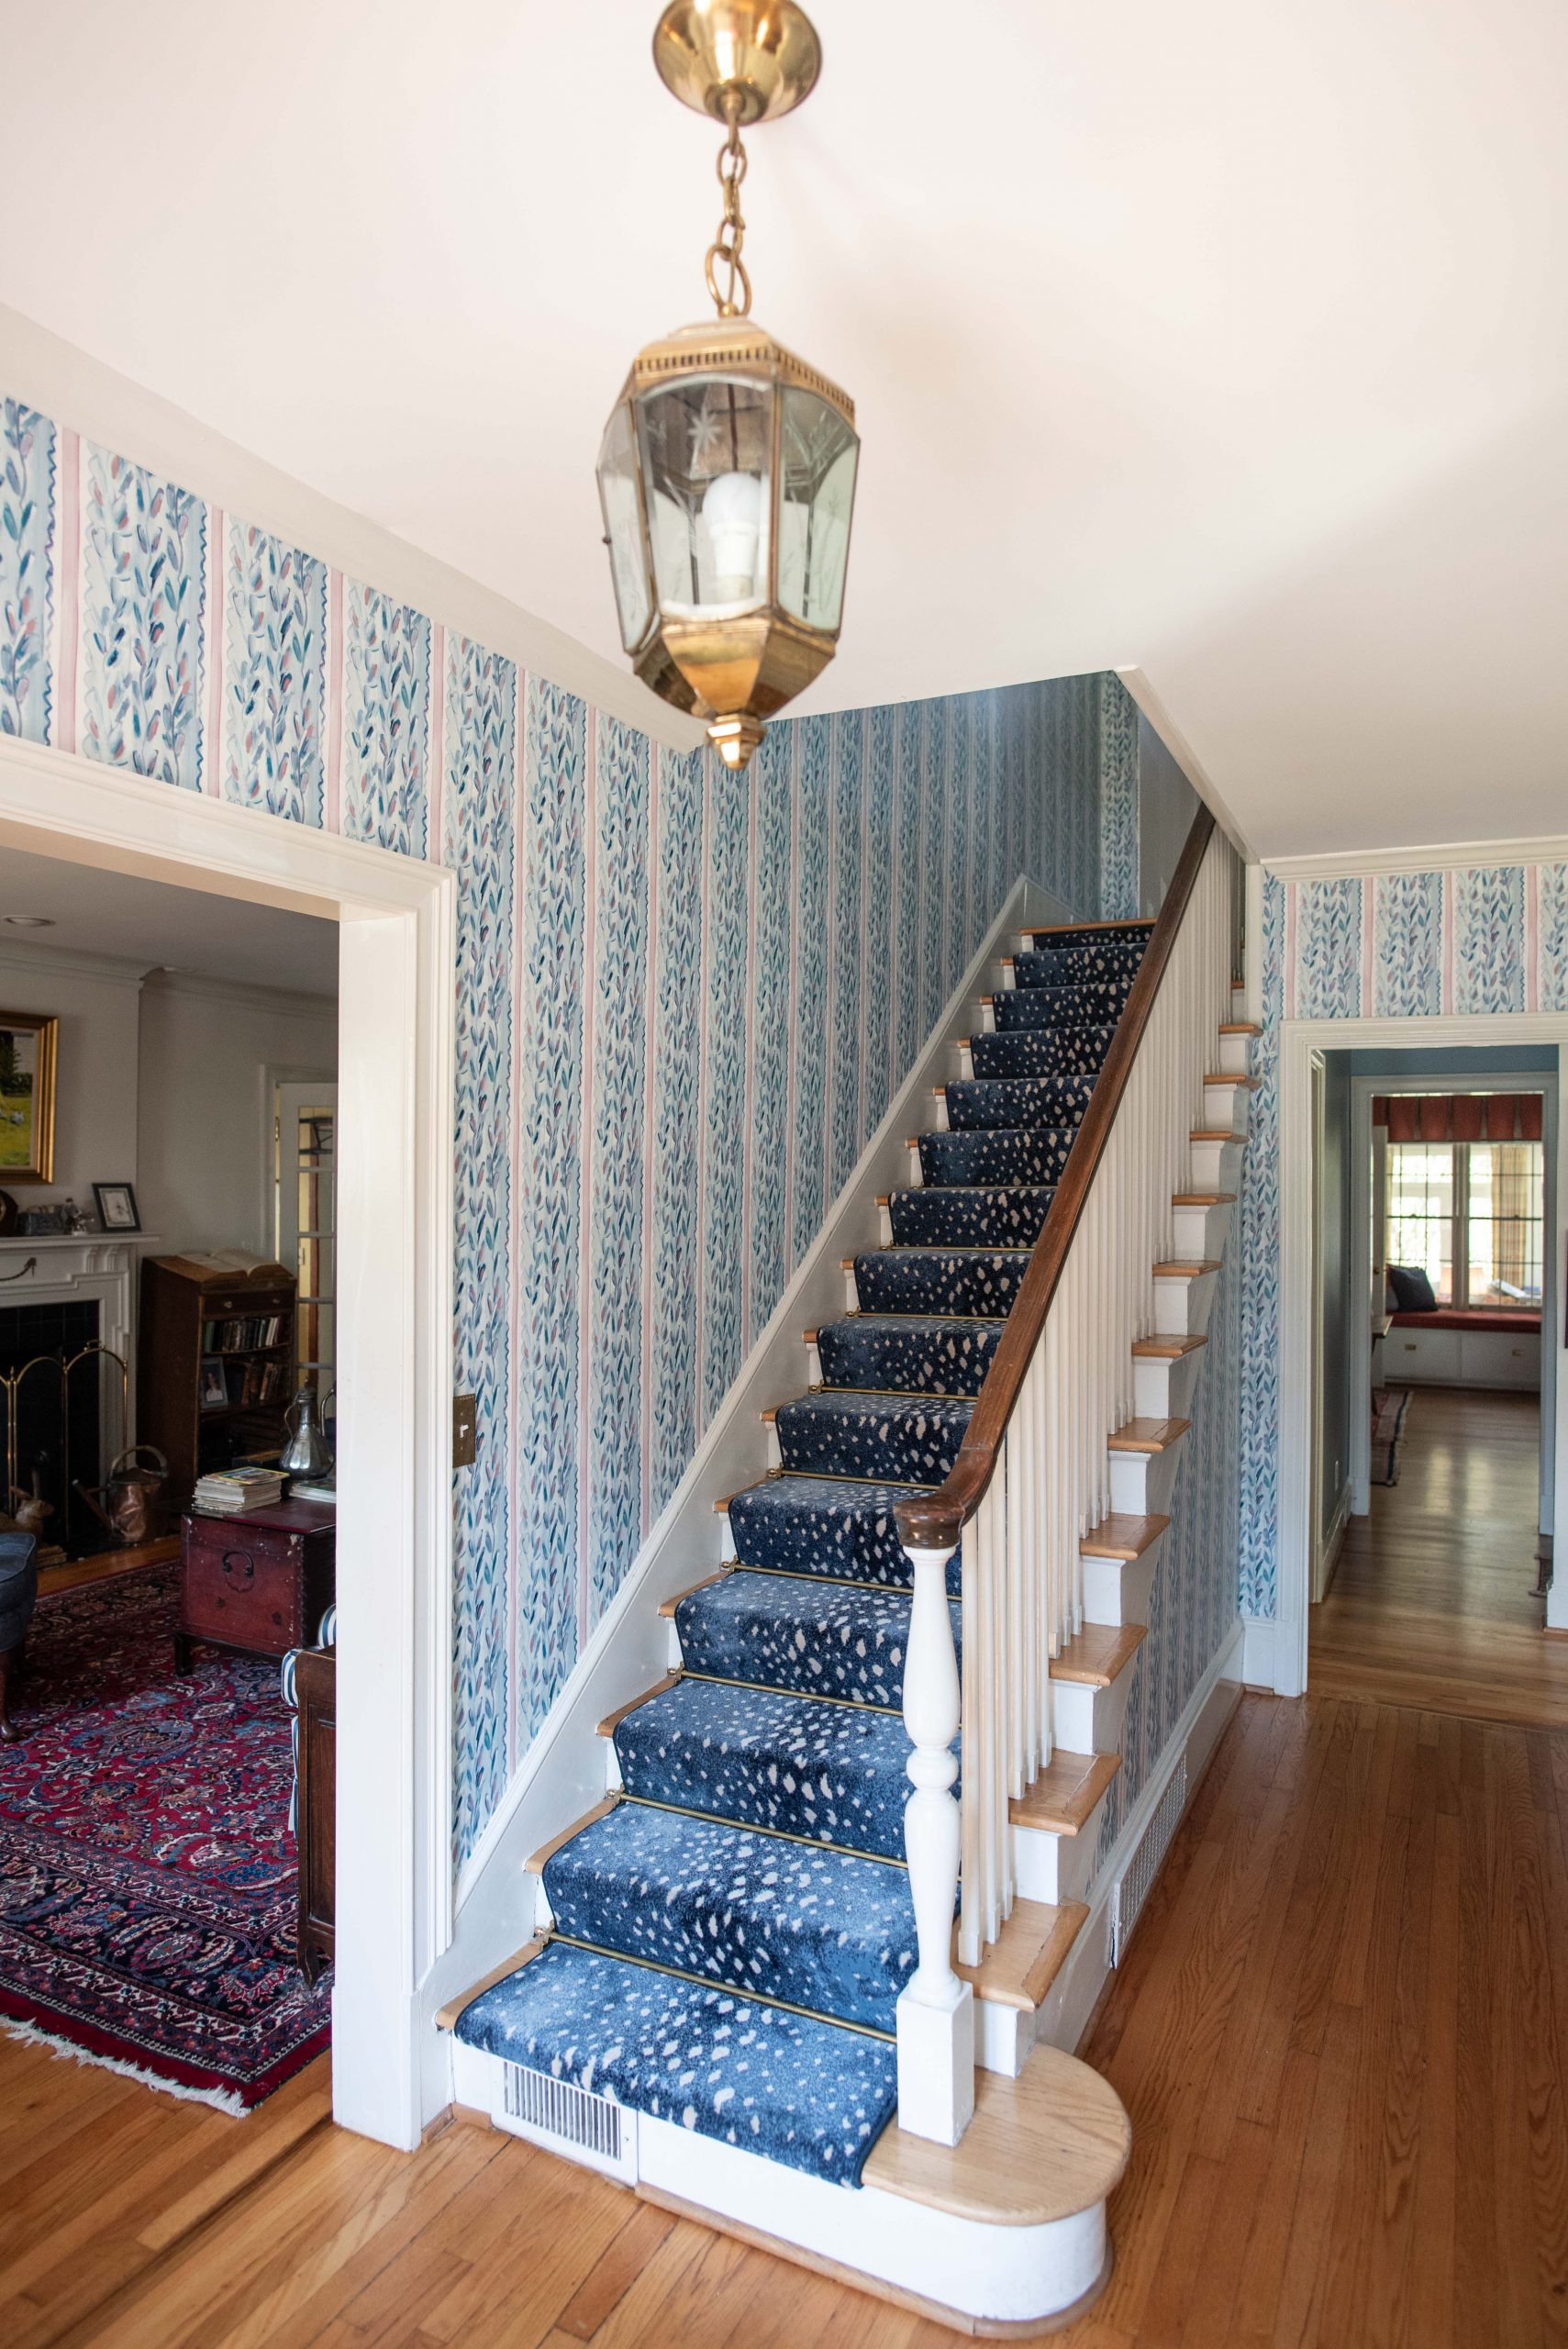 Traditional foyer with blue striped wallpaper and a blue stair runner